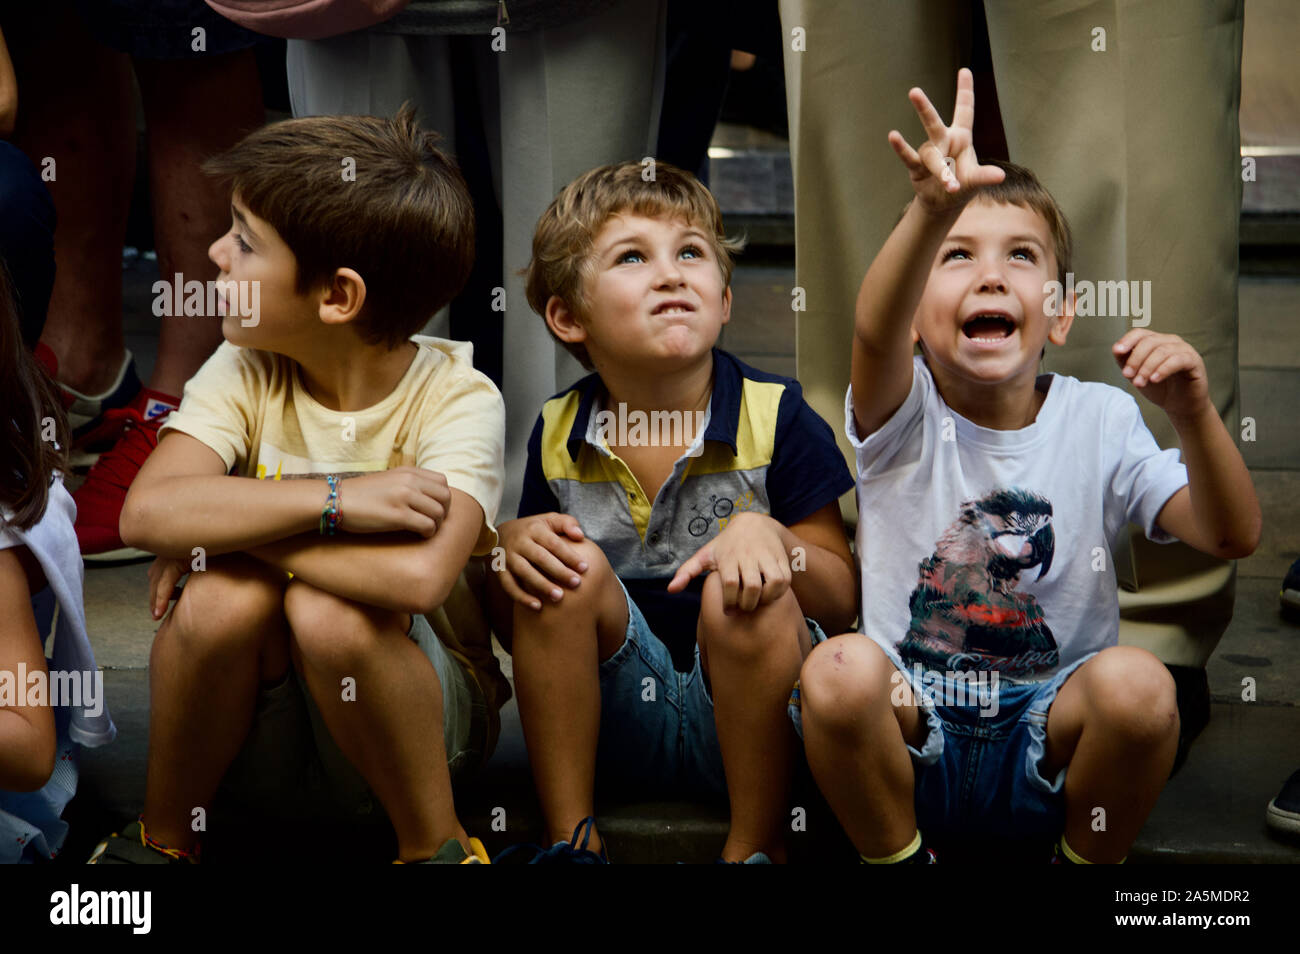 Boys watching the Giants Parade during La Merce Festival 2019 at Placa de Sant Jaume in Barcelona, Spain Stock Photo